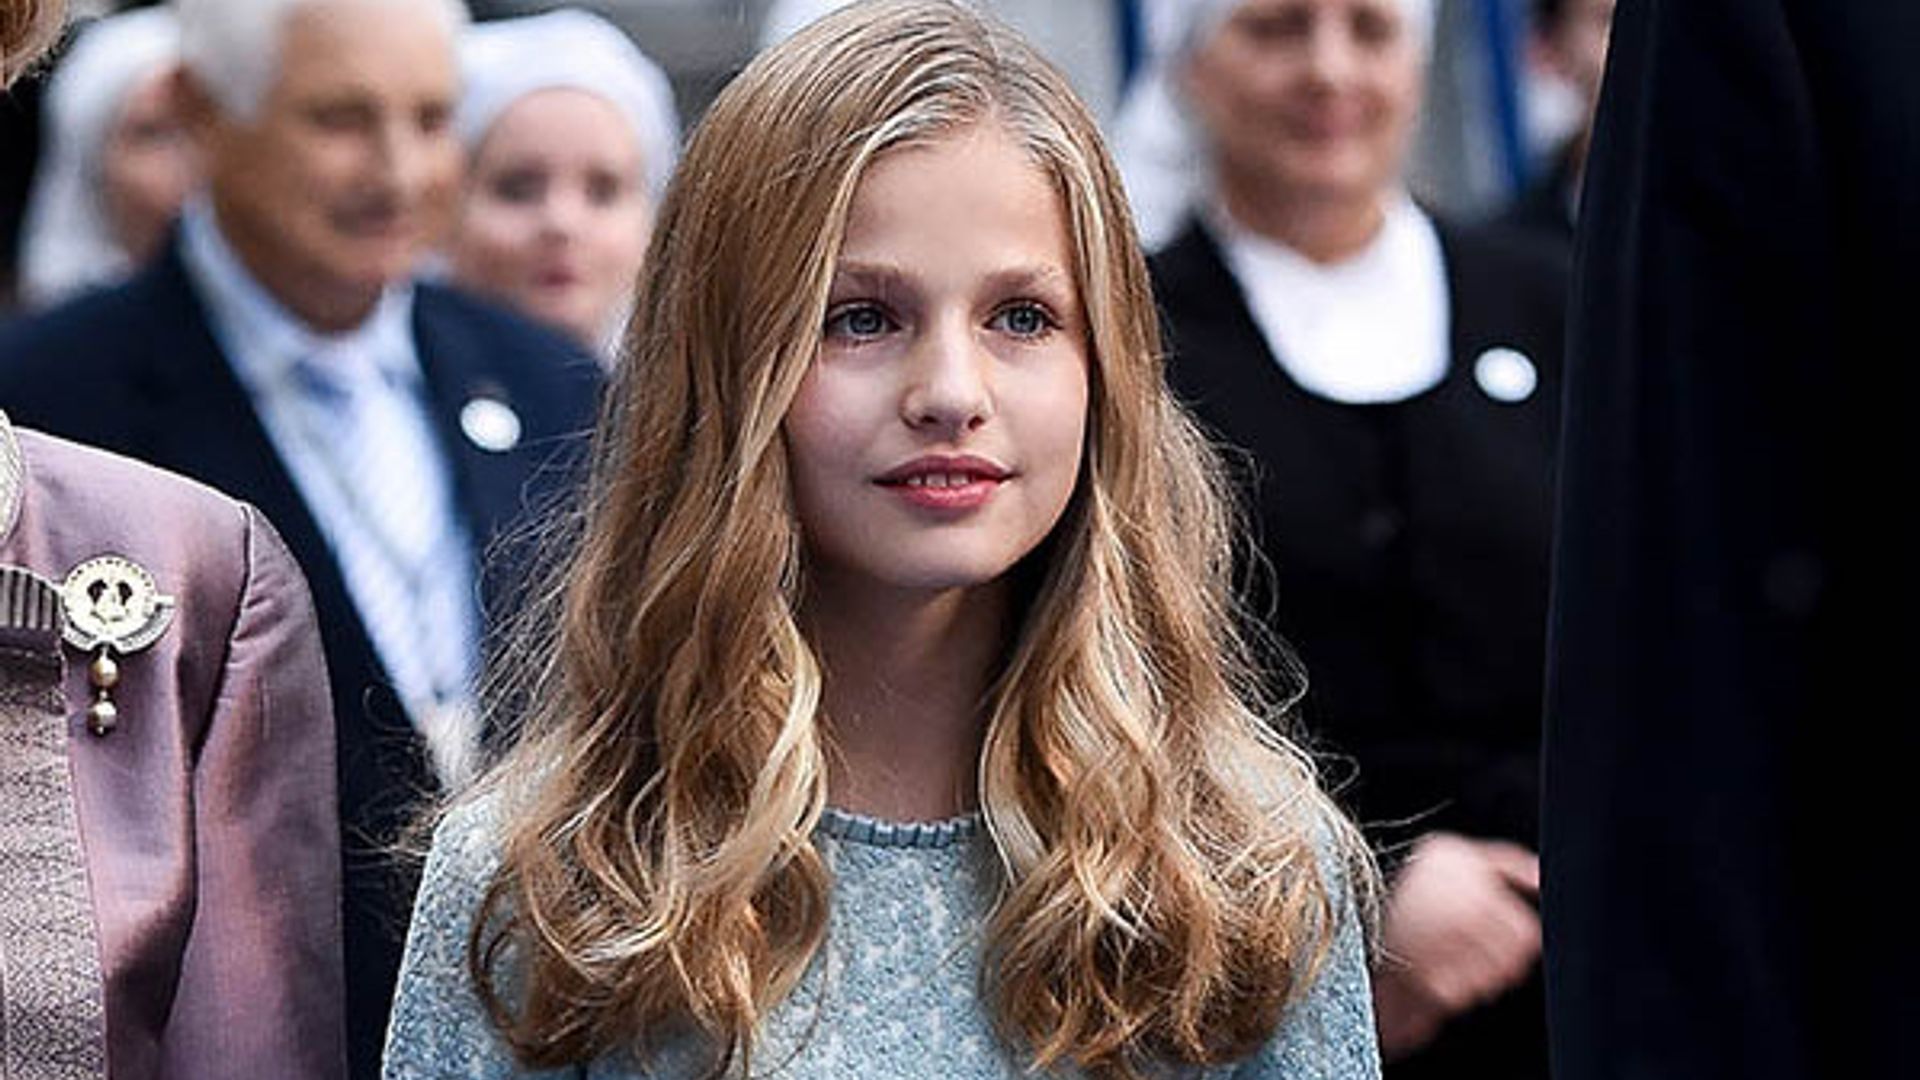 Everything you need to know about Princess Leonor of Spain, ahead of